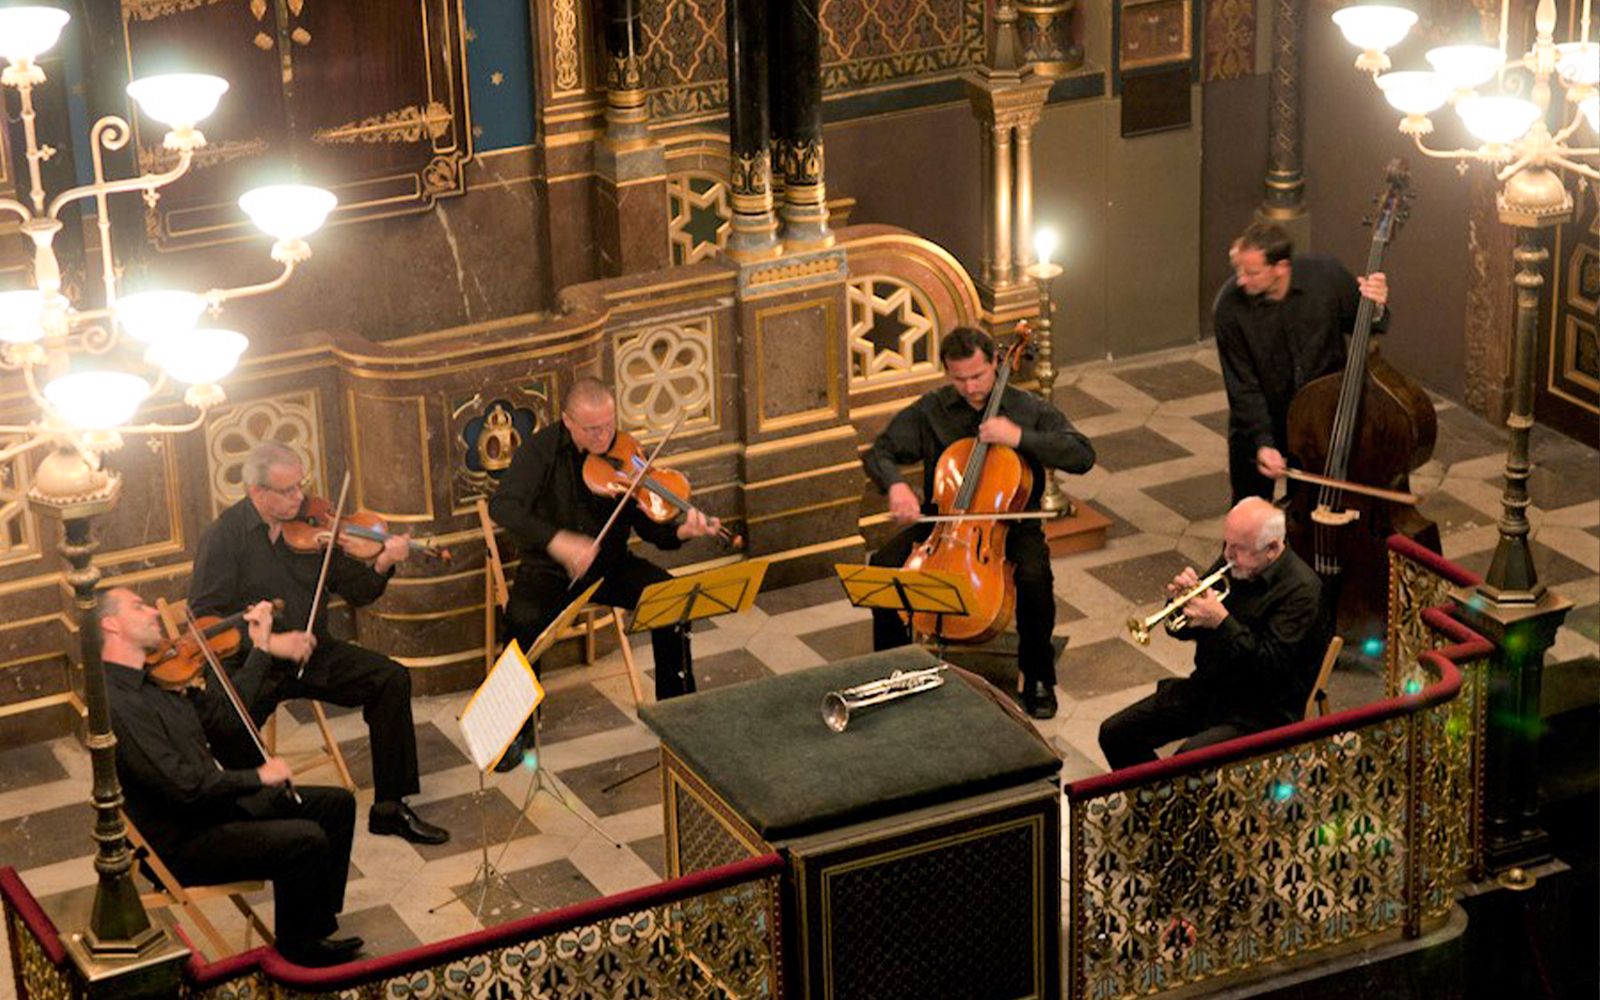 Image of Tickets to a Classical Concert in the Spanish Synagogue